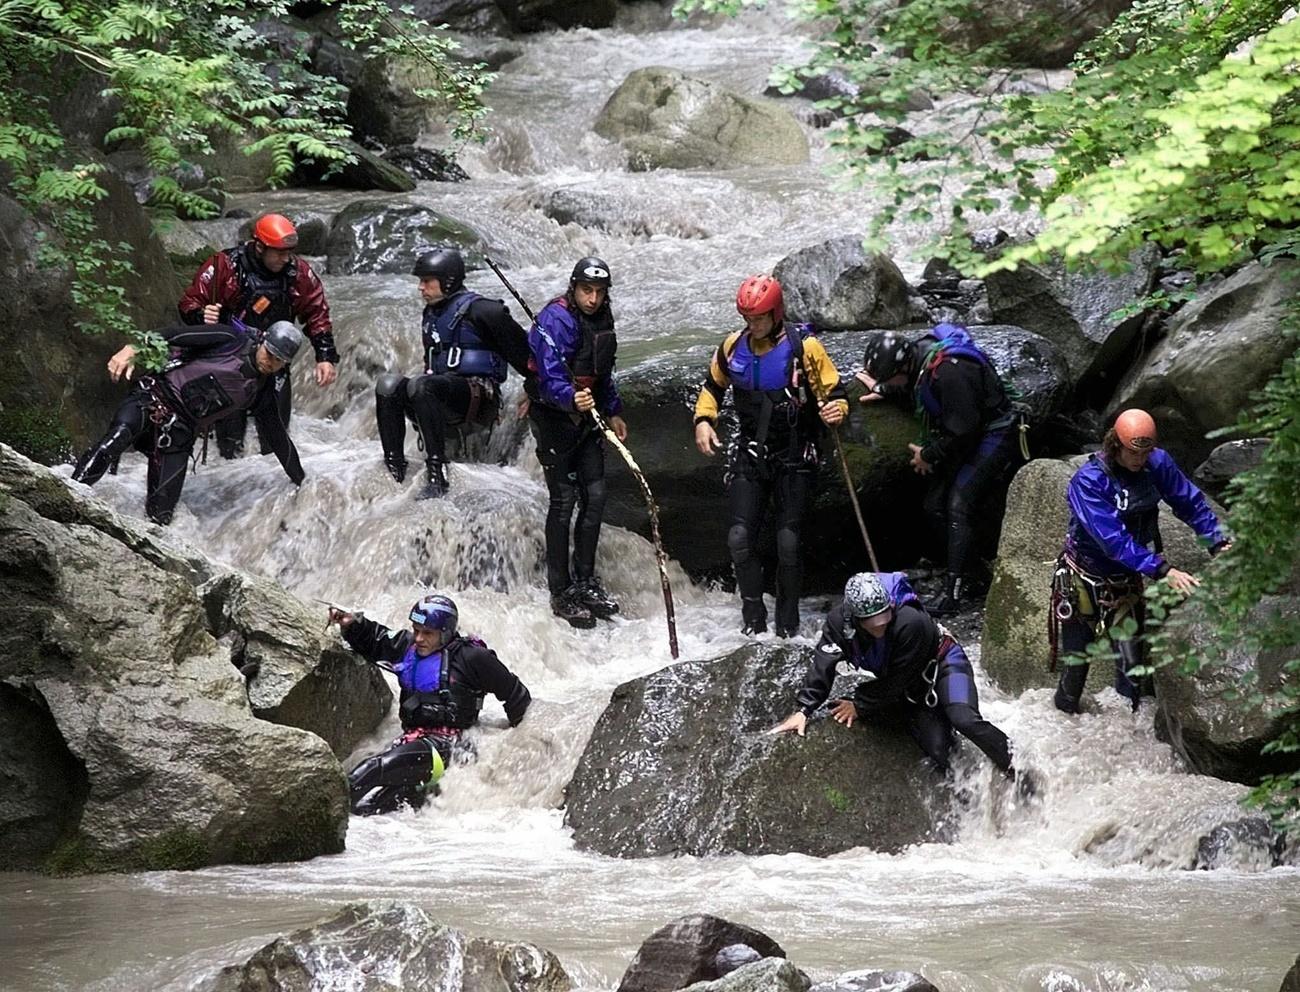 Rescuers stand in riverbed, some probing water with sticks